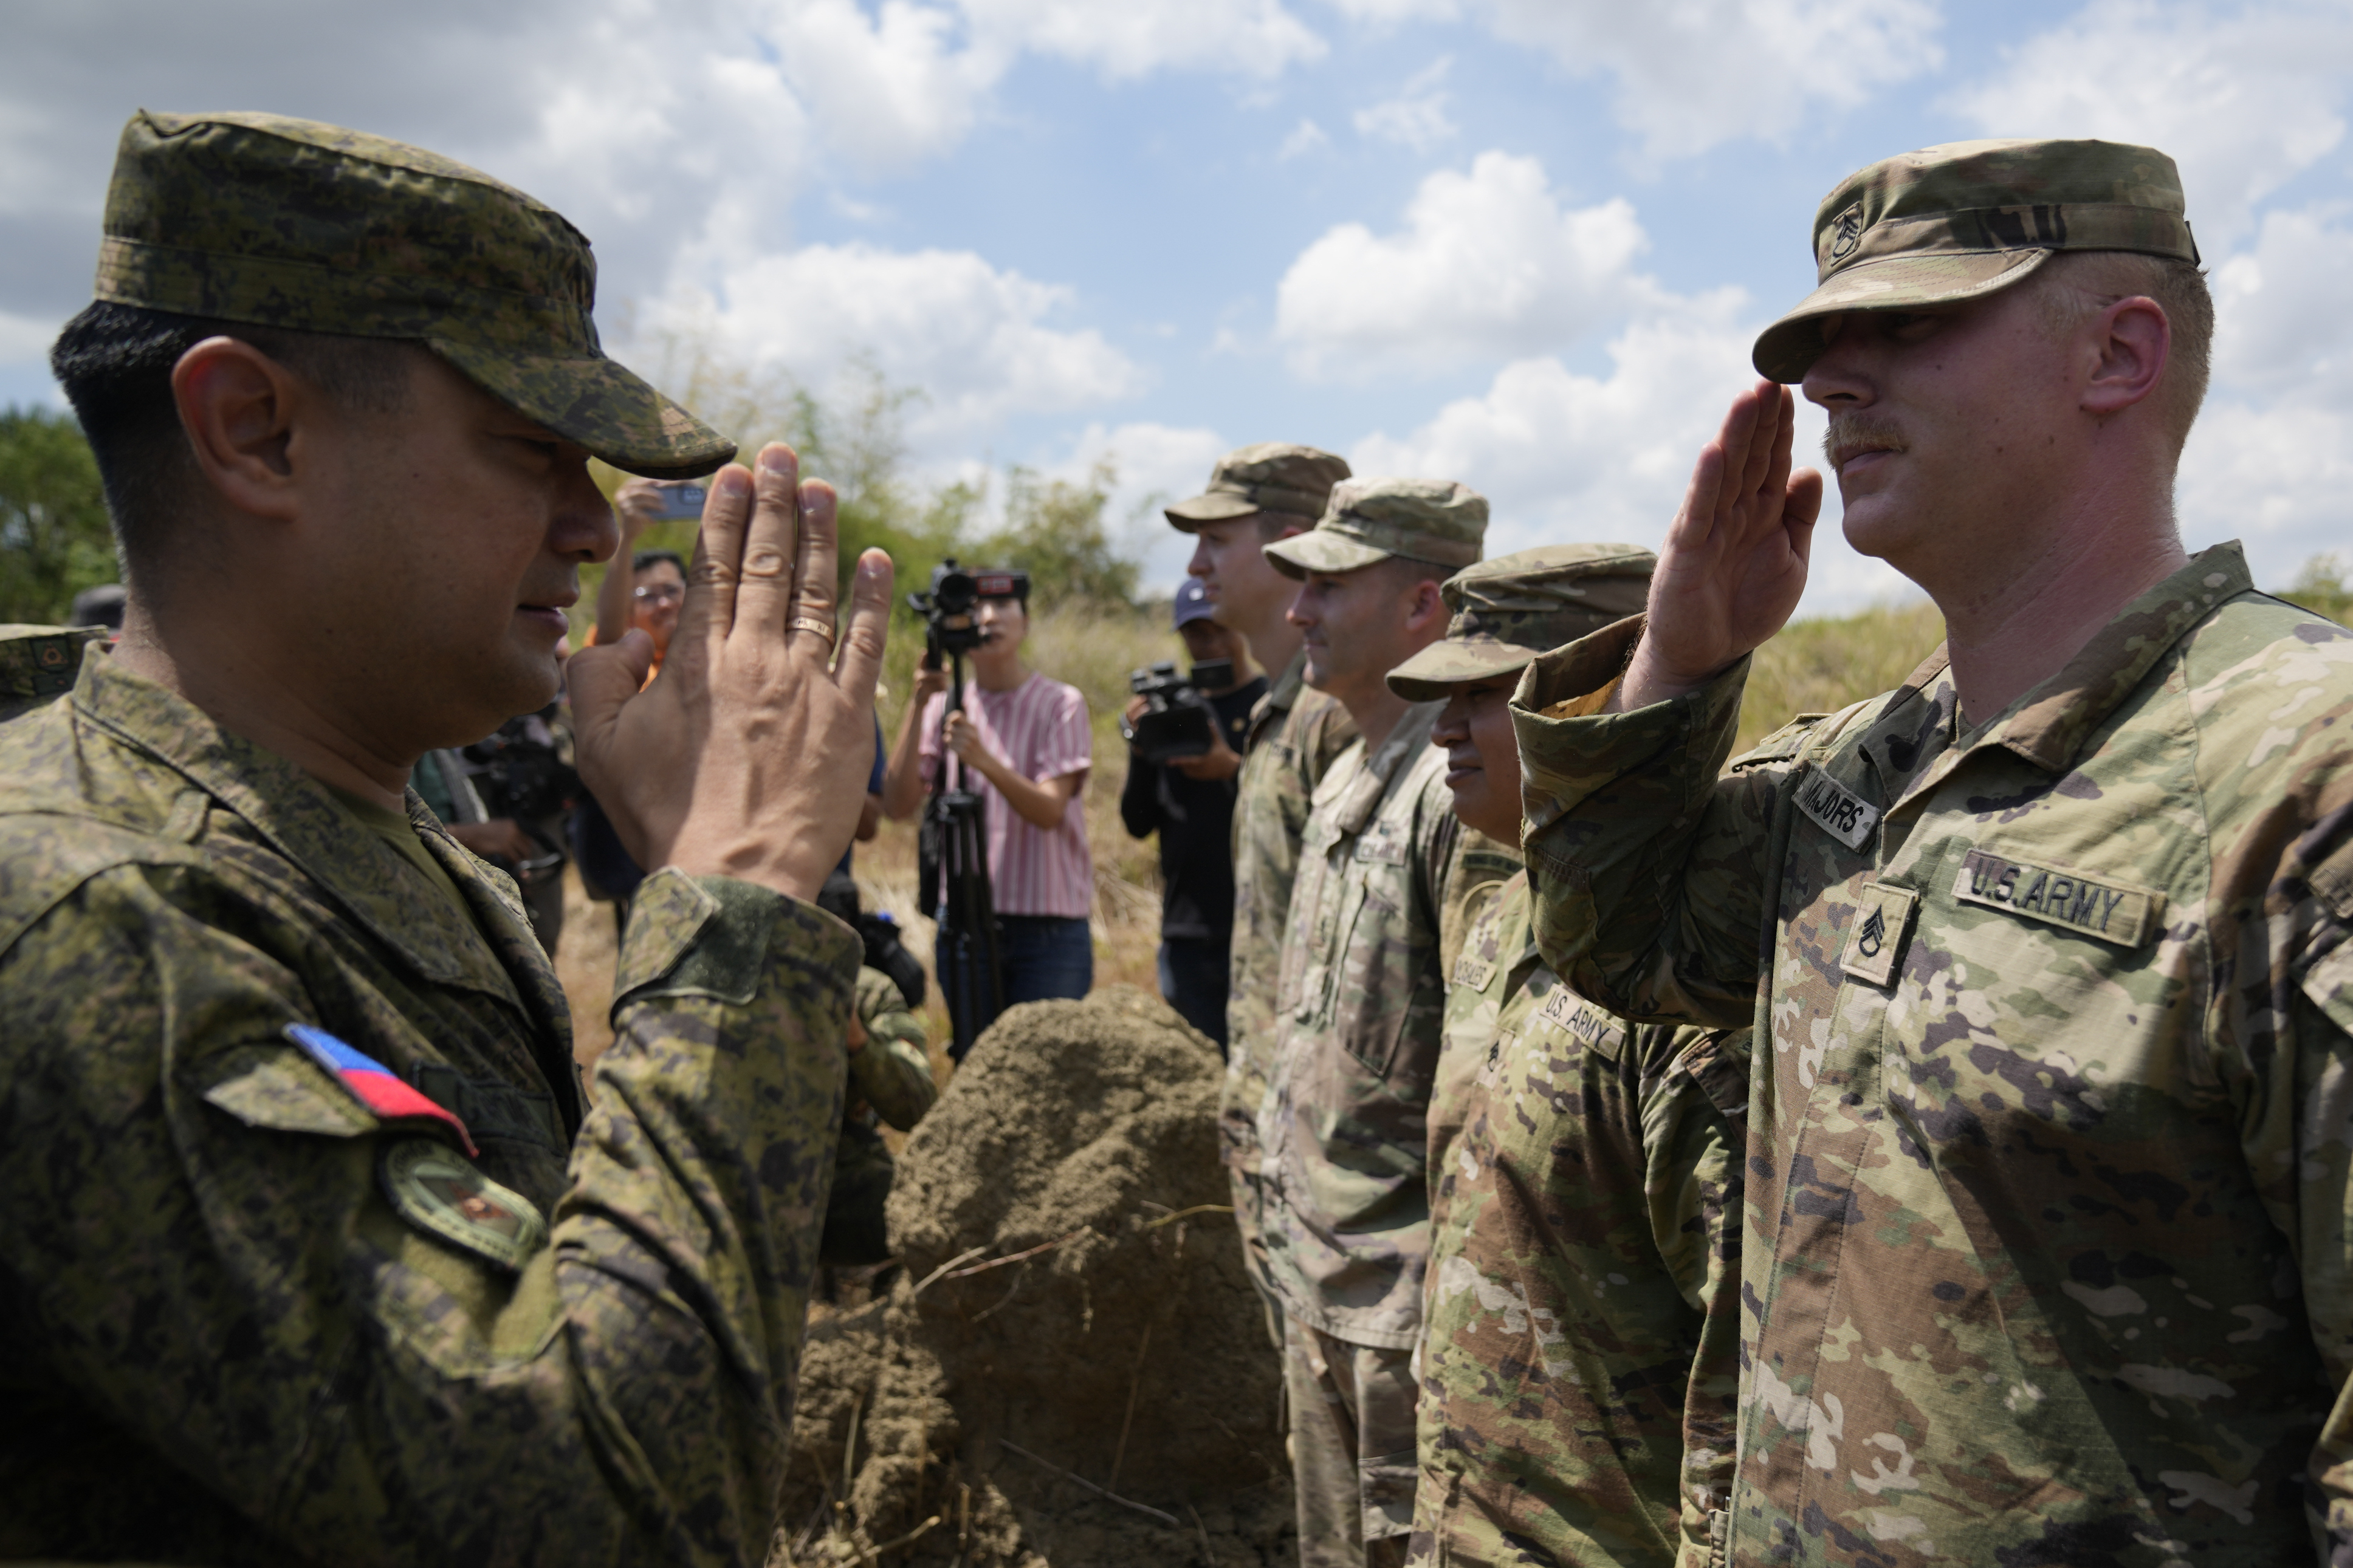 Philippine Army Artillery Regiment Commander Anthony Coronel, left, returns a salute from a U.S. soldier during a joint military drill in the northern Philippines on Friday, March 31, 2023. (Aaron Favila—AP)